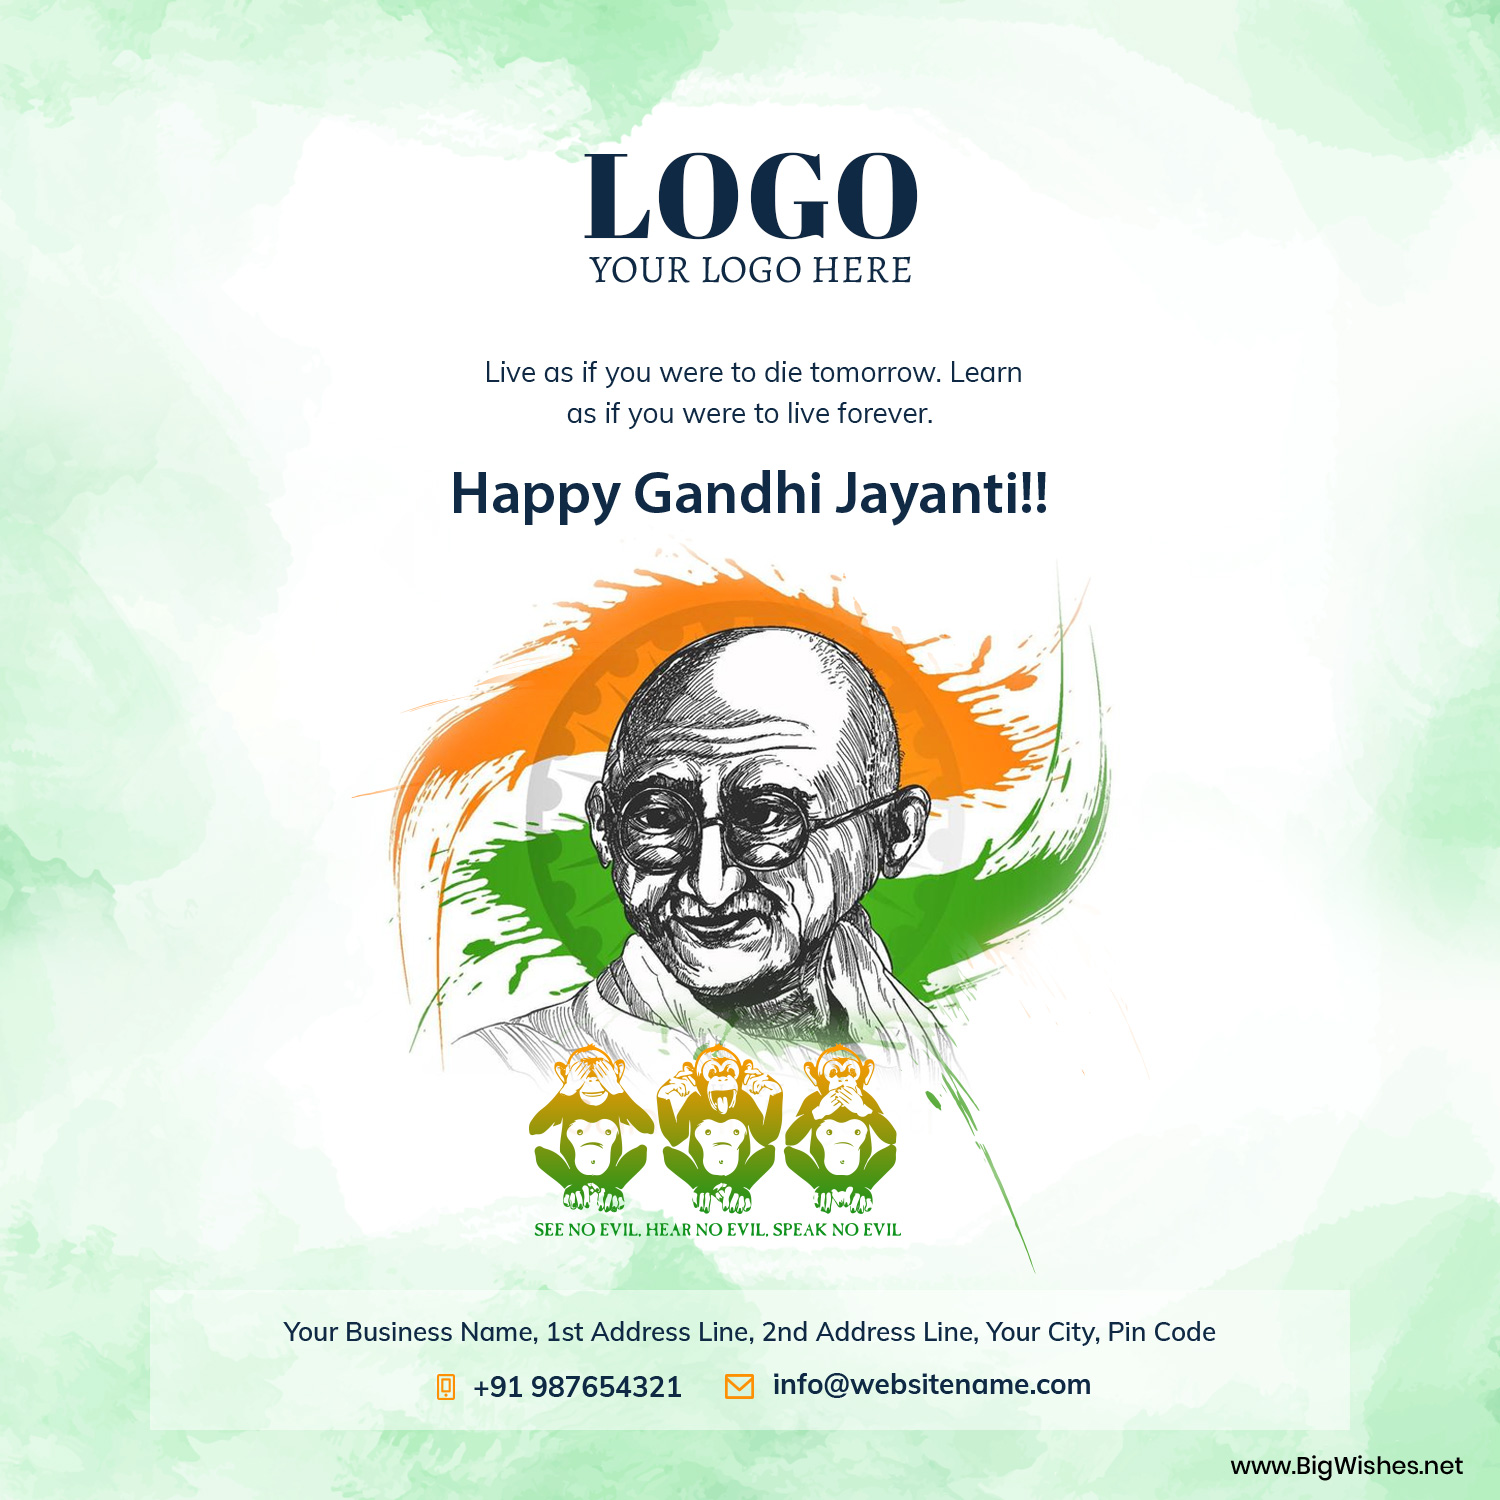 Gandhi Jayanti 2022 Images & HD Wallpapers for Free Download Online: Wish  Happy Gandhi Jayanti With WhatsApp Greetings and Facebook Messages on 2nd  October | 🙏🏻 LatestLY